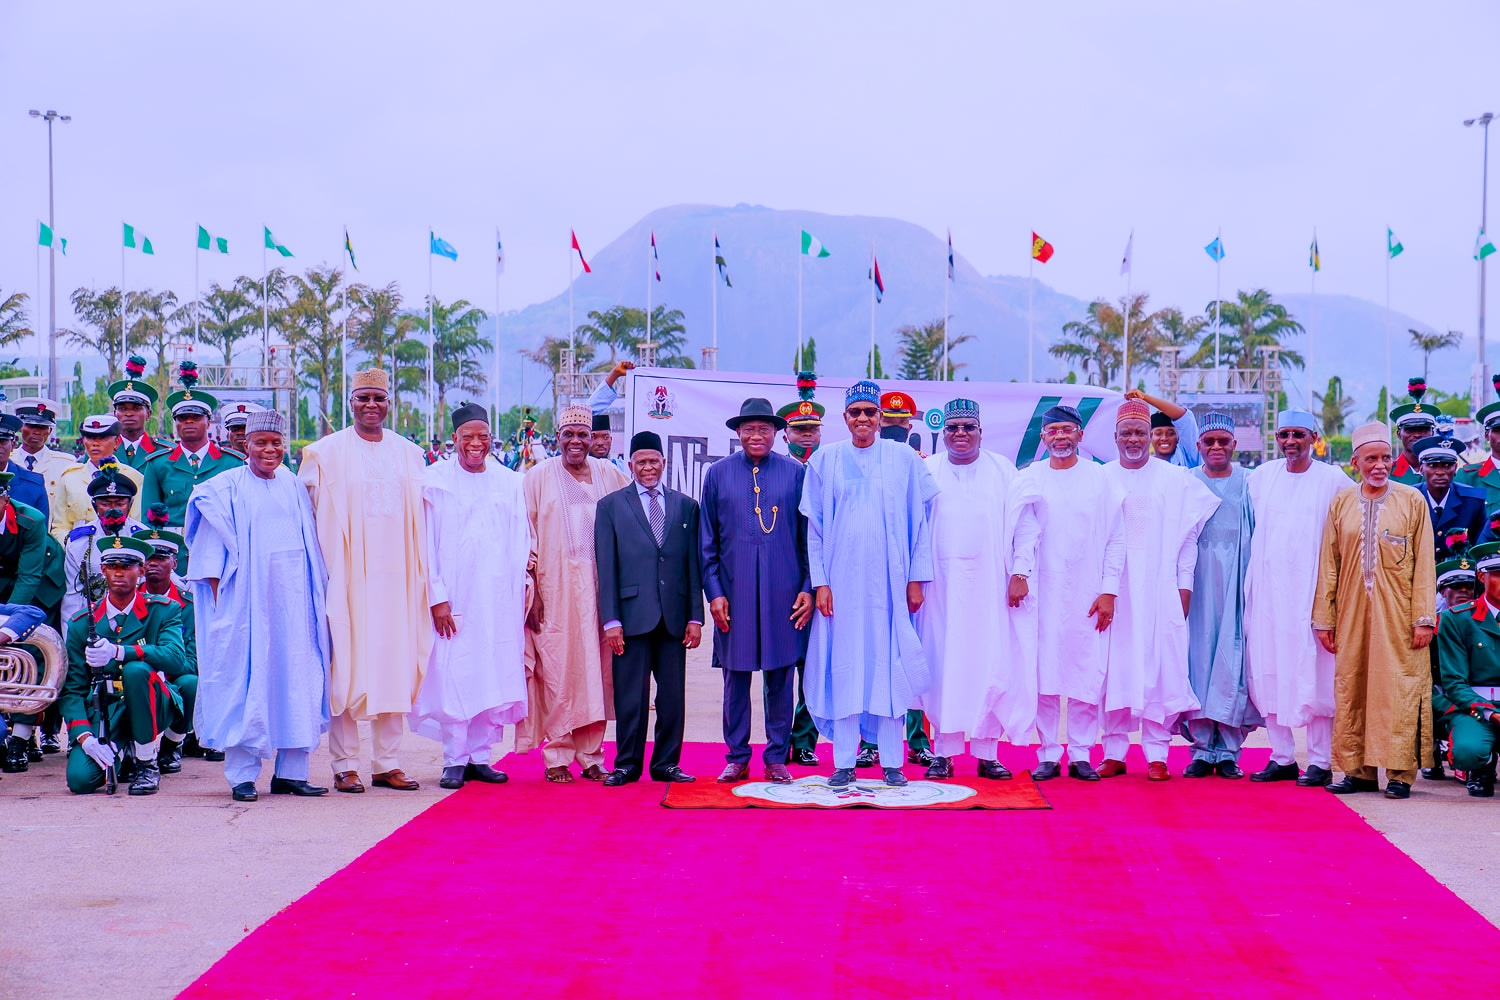 President Buhari with L-R: Minister of Defence Maj. Gen. Bashir Magashi (Rtd), SGF Boss Mustapha, APC National Chairman Abdullahi Adamu, Special Envoy to Lake Chad Amb. Babagana Kingibe, Chief Justice of Nigeria Justice Ibrahim Tanko Mohammed, Former President Goodluck Jonathan, Senate President Ahmed Lawan, Speaker Femi Gbajabiamila, Deputy Speaker Admed Idris Wase, COS Prof. Ibrahim Gambari, FCT Minister Muhammad Bello and Dean of Diplomatic community and High Commissioner of Cameroon Amb. Salaheddine Abbas at the 2022 Democracy Day Celebration at the Eagle Square, Abuja on 13th June 2022